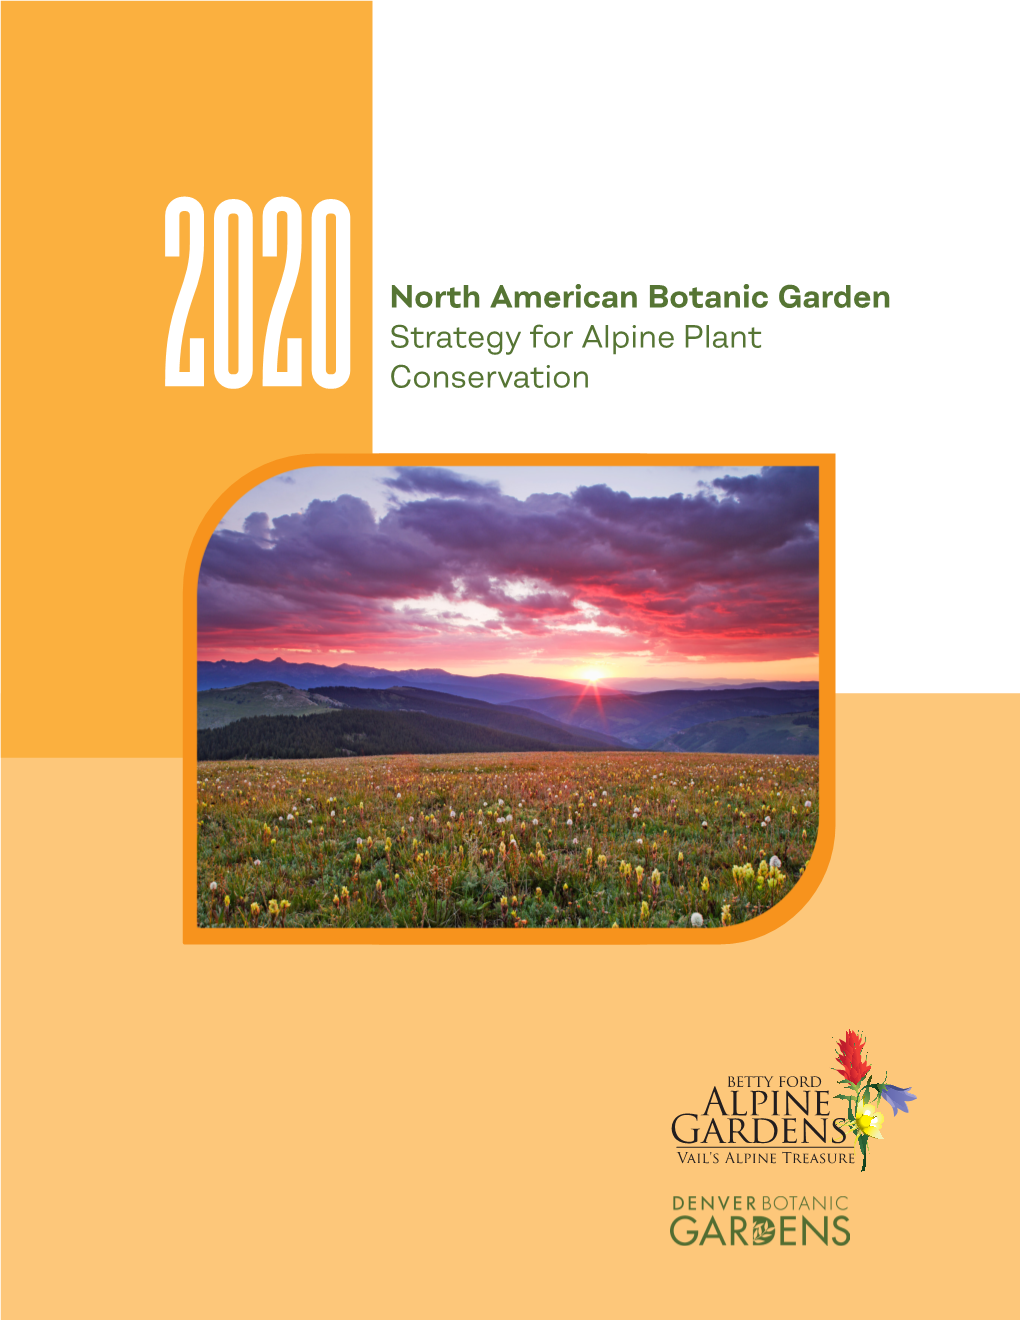 2020 North American Botanic Garden Strategy for Alpine Plant Conservation